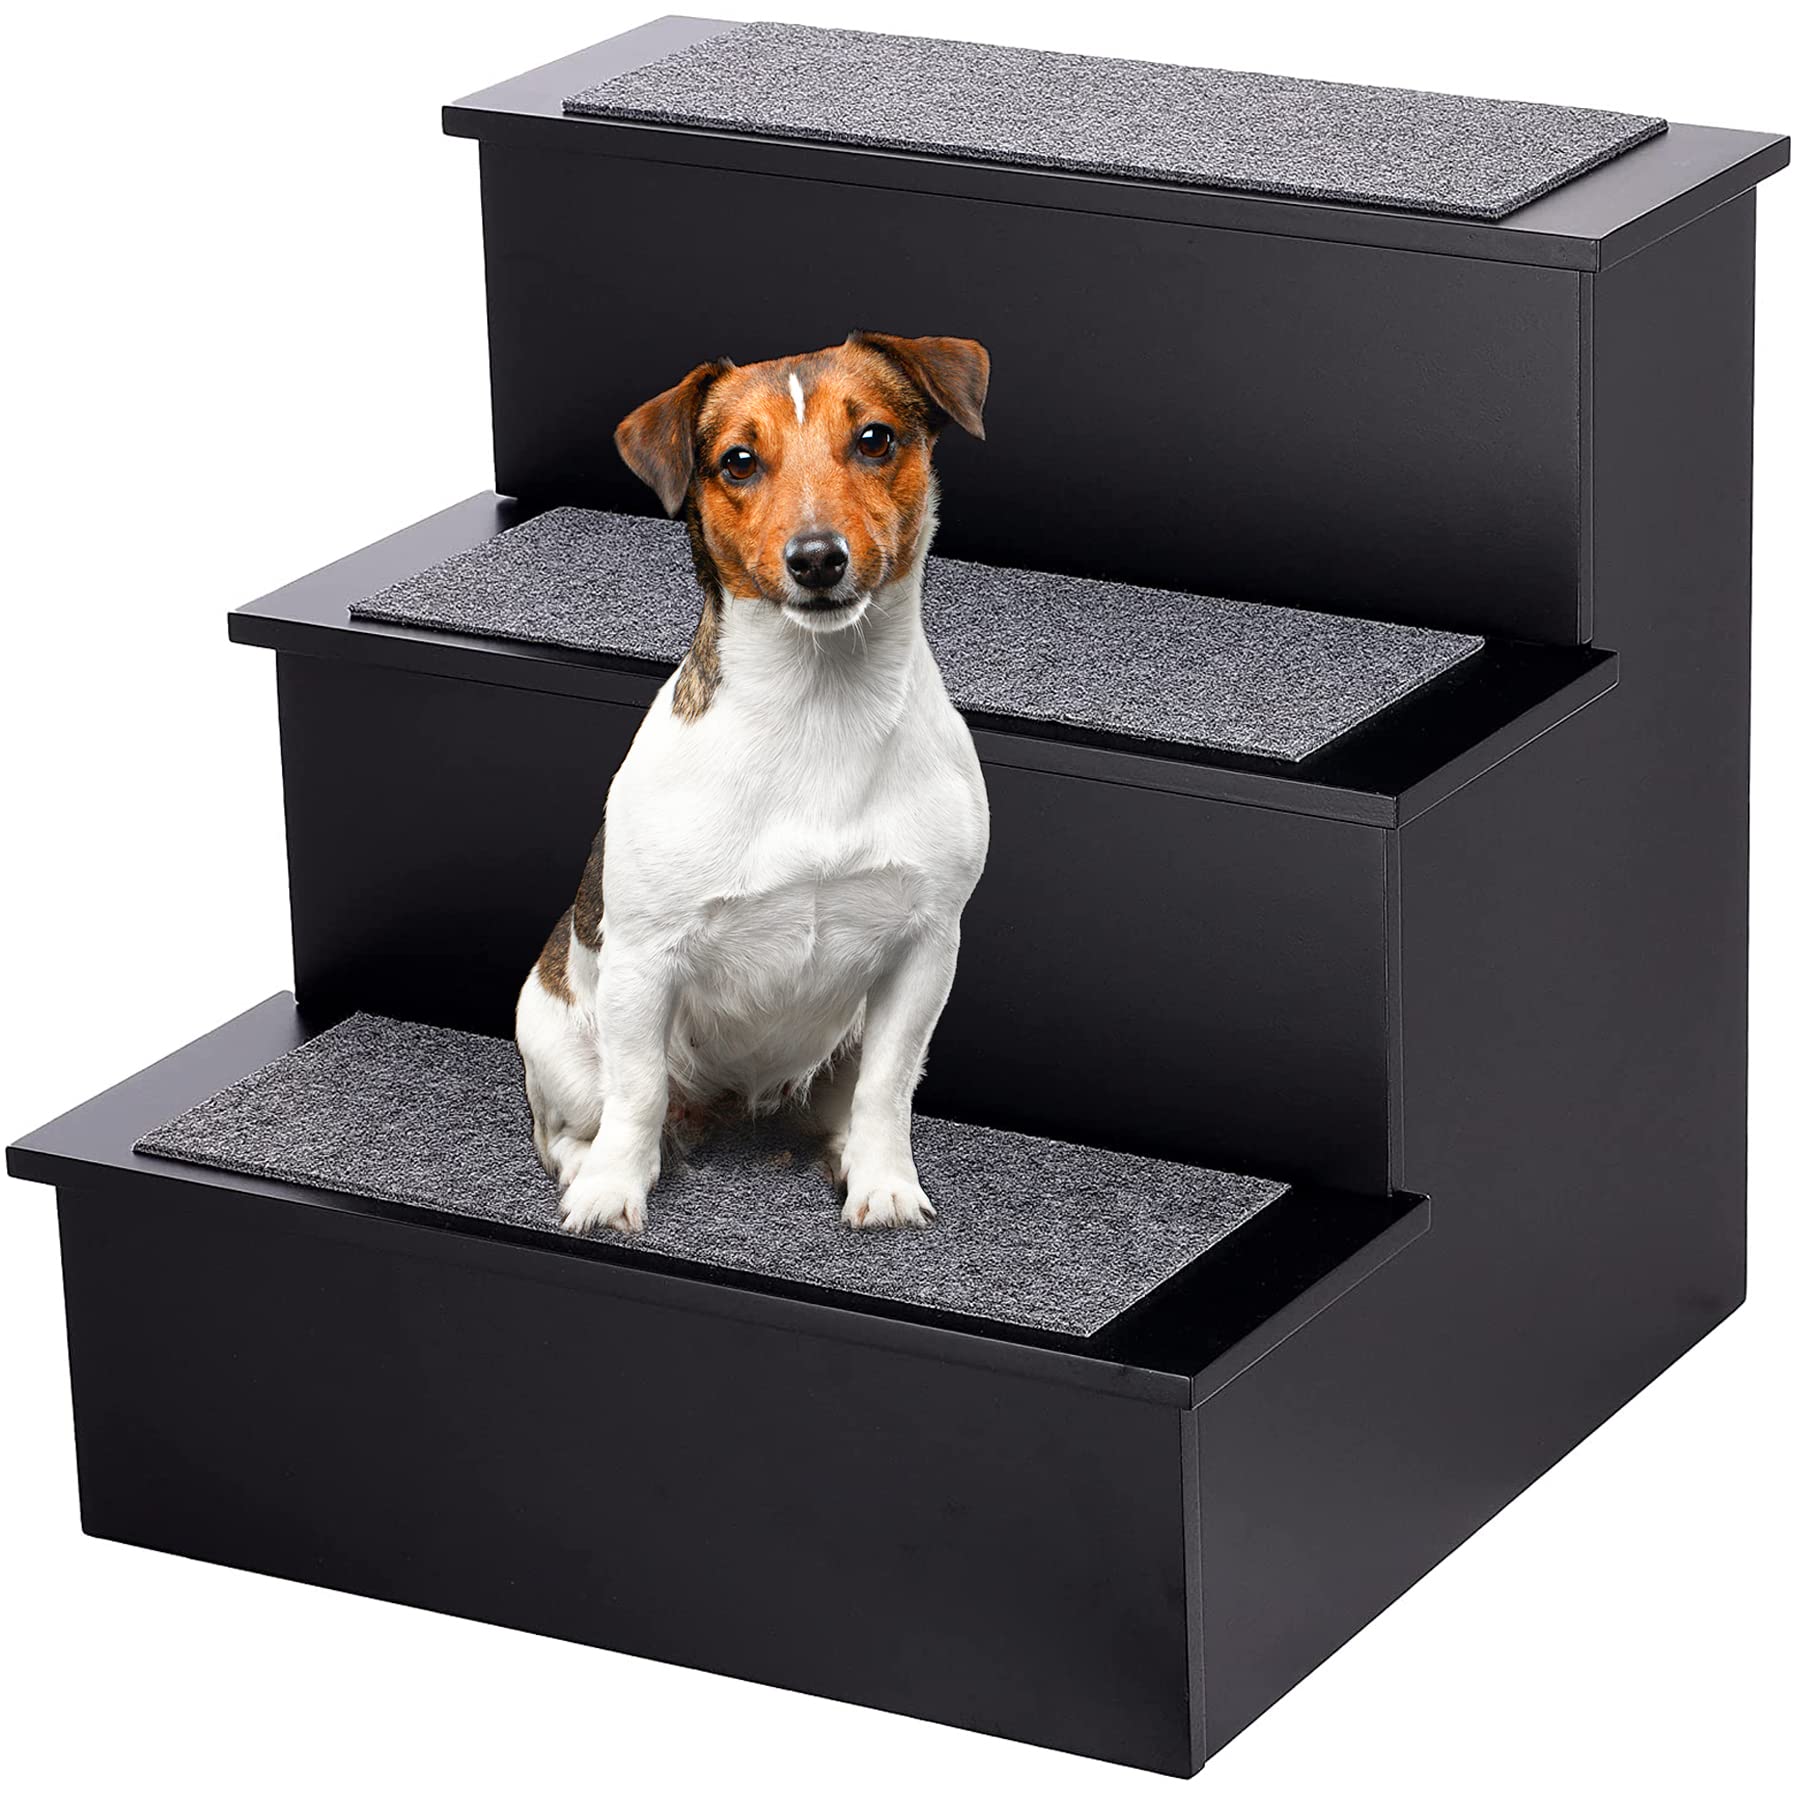 AdirPets Deluxe 3-Step Pet Stairs with Non-Slip Surface and Carpeted Treads - Sleek Pet Steps for Small Dogs, Cats, Elderly or Disabled Pets - Supports Up to 175lbs Weight (Variation)  - Like New